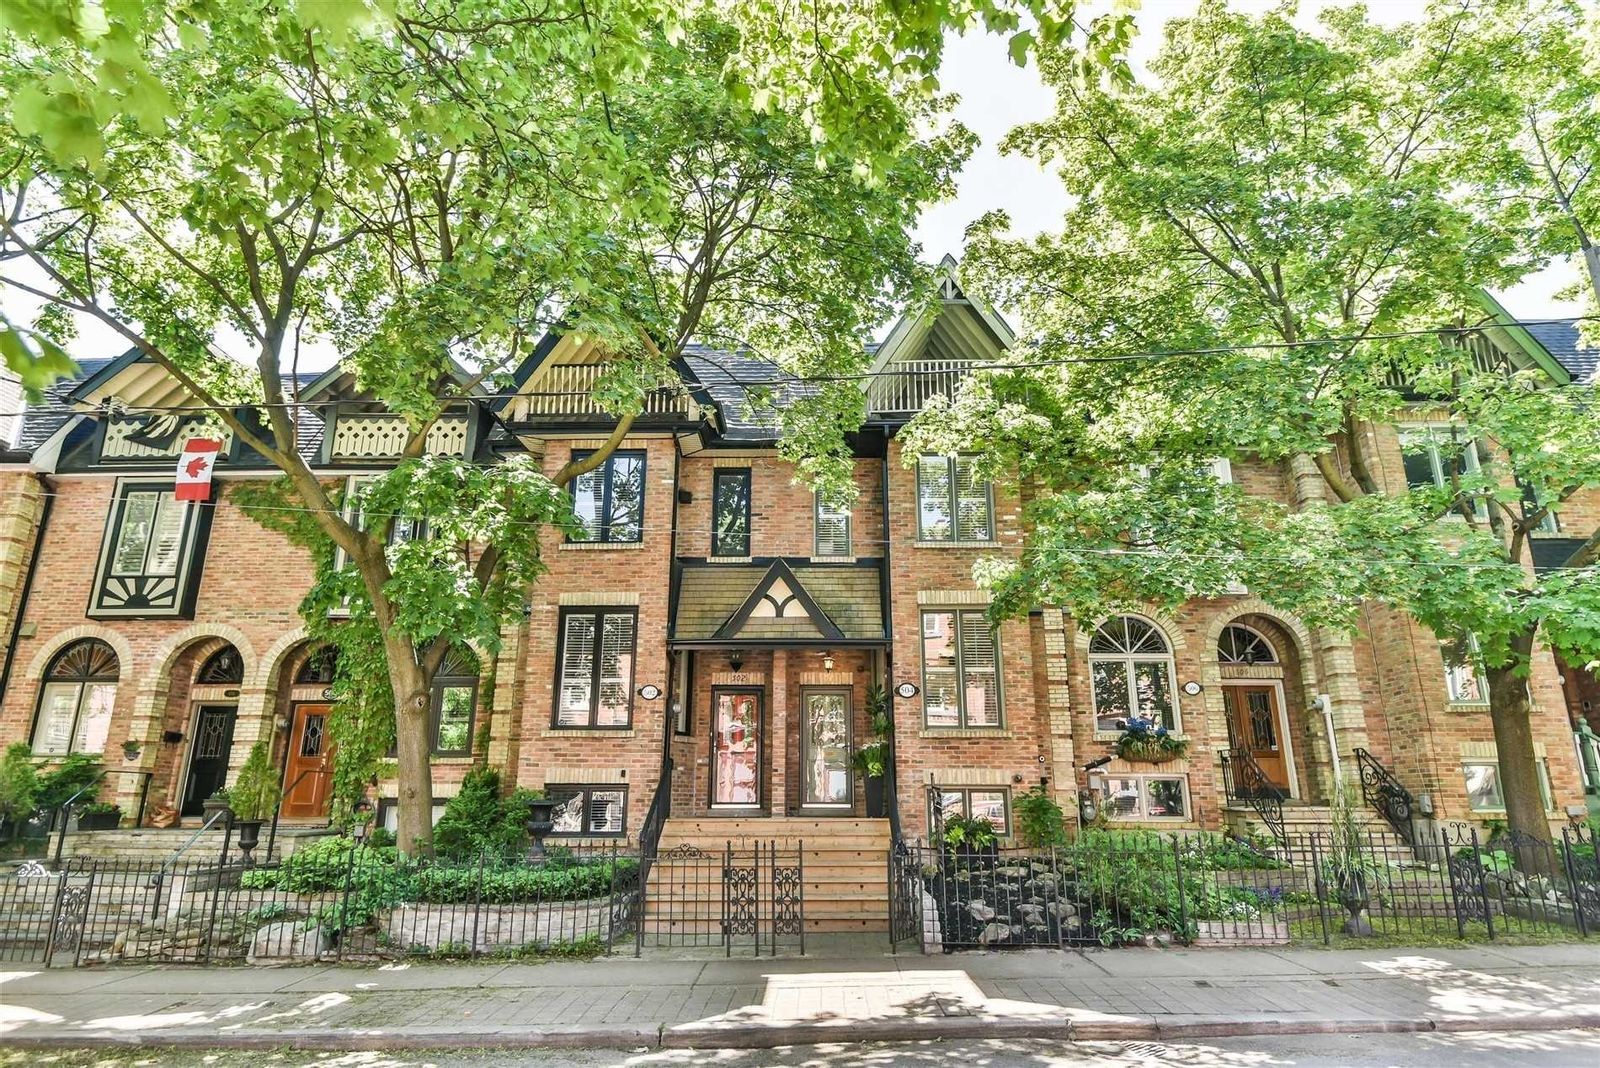 For Sale: Thoroughly Renovated In Cabbagetown